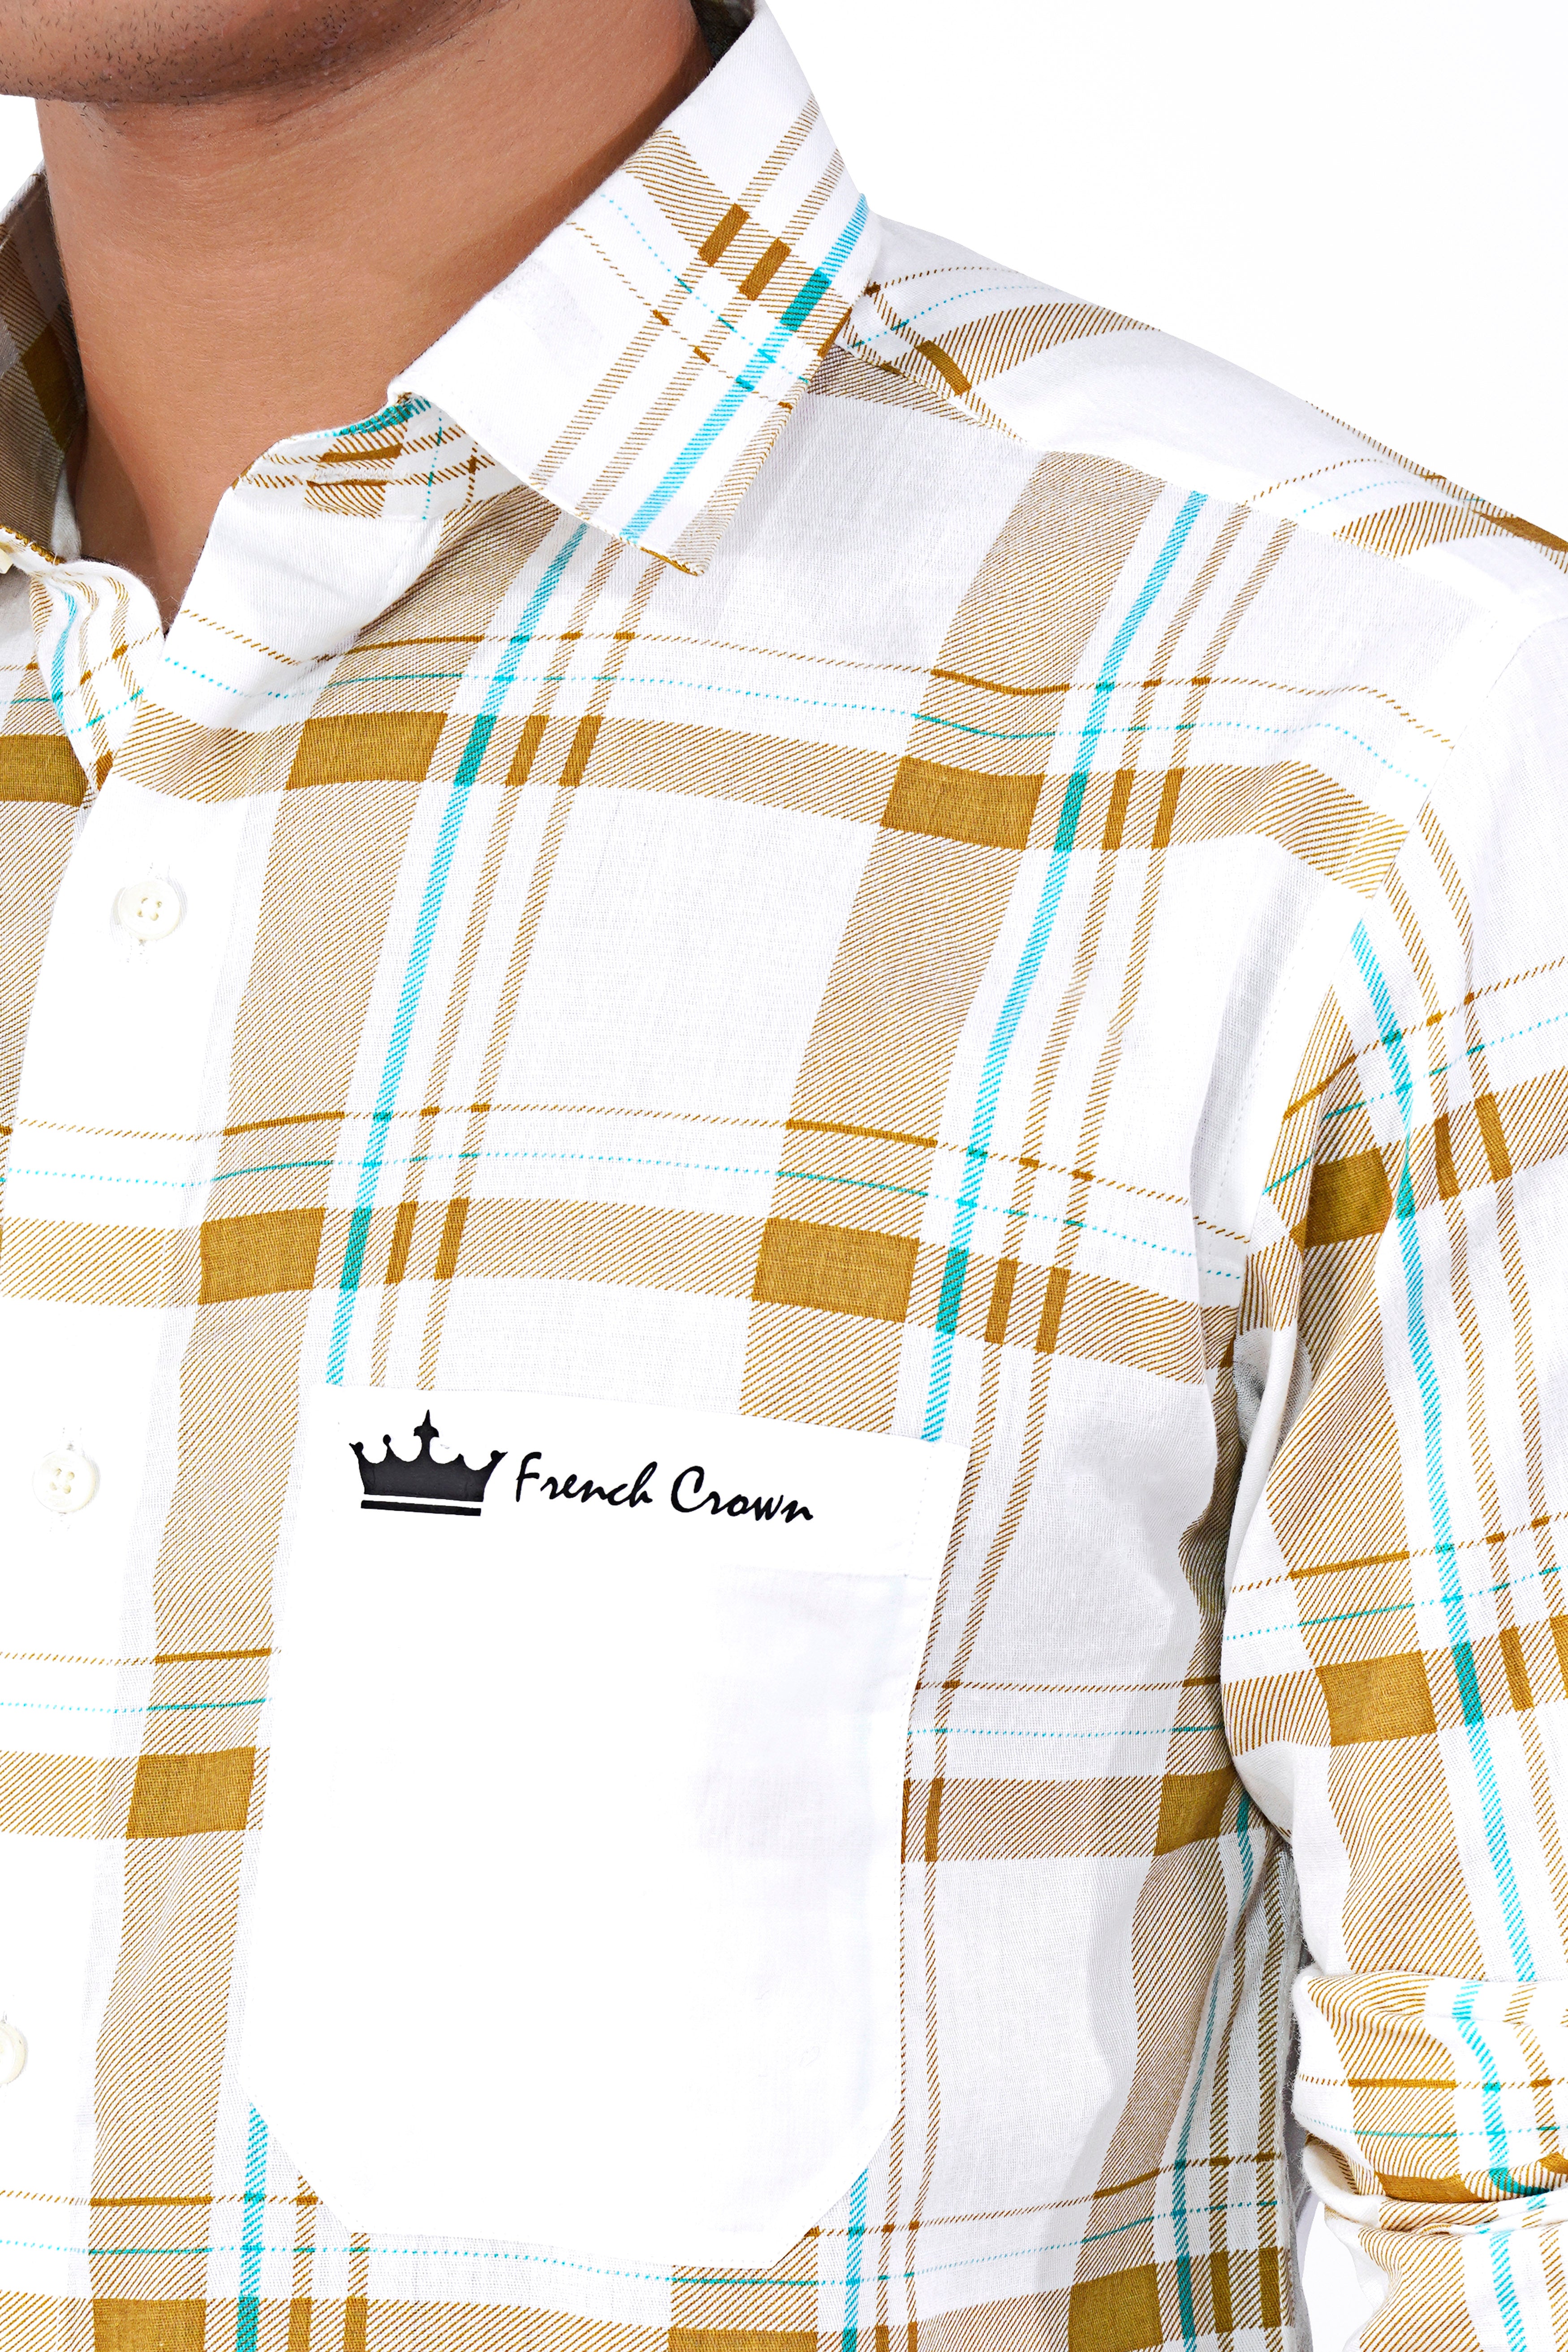 Bright White and Sandy Brown Plaid with Funky Printed Premium Cotton Designer Shirt 8384-RPRT73-38, 8384-RPRT73-H-38, 8384-RPRT73-39, 8384-RPRT73-H-39, 8384-RPRT73-40, 8384-RPRT73-H-40, 8384-RPRT73-42, 8384-RPRT73-H-42, 8384-RPRT73-44, 8384-RPRT73-H-44, 8384-RPRT73-46, 8384-RPRT73-H-46, 8384-RPRT73-48, 8384-RPRT73-H-48, 8384-RPRT73-50, 8384-RPRT73-H-50, 8384-RPRT73-52, 8384-RPRT73-H-52